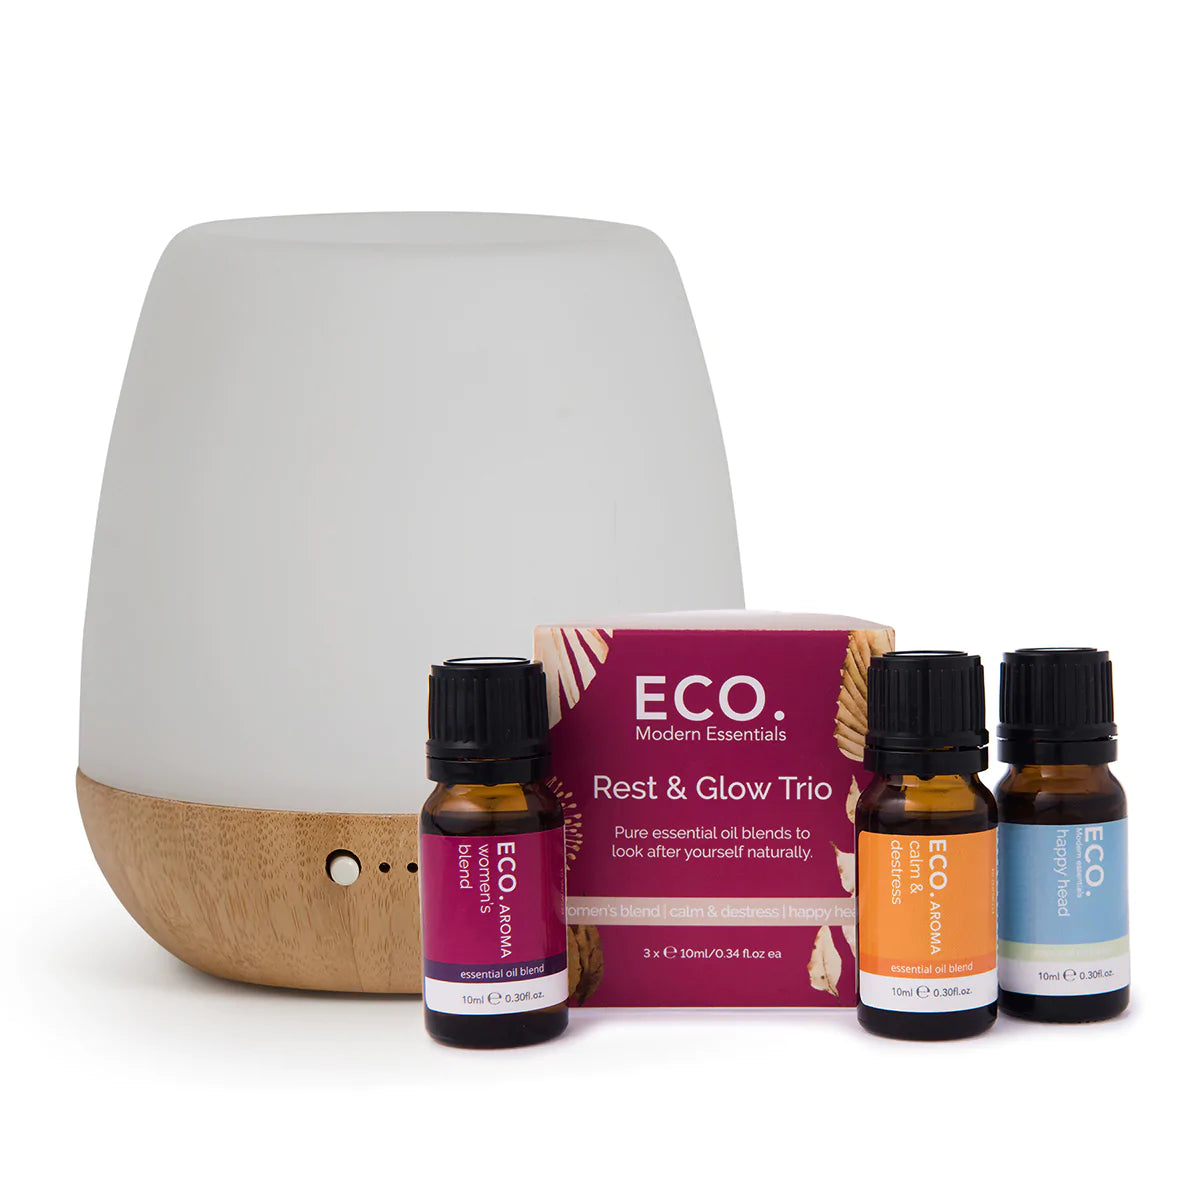 Image of Bliss Diffuser & Rest & Glow Essential Oil Trio